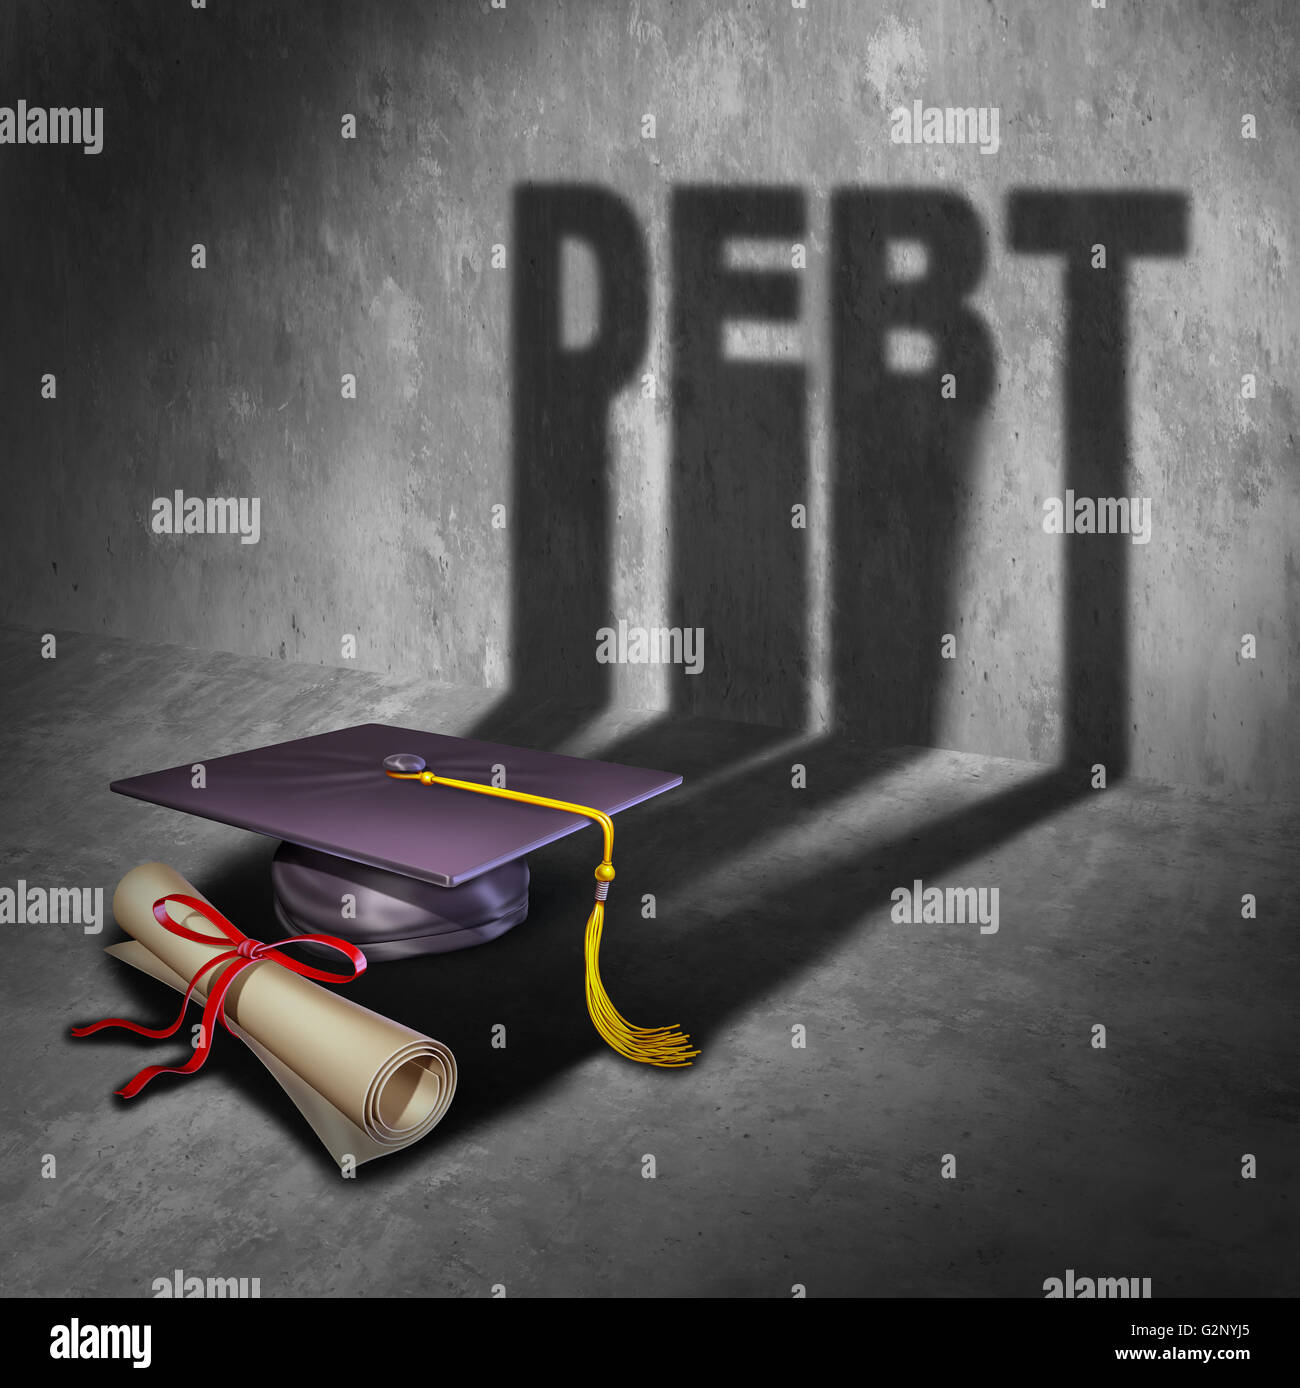 College debt and student financial concept as a graduation mortar board and diploma with a cast shadow as an icon for tuition loan repayment or lending and education financing with 3D illustration elements. Stock Photo